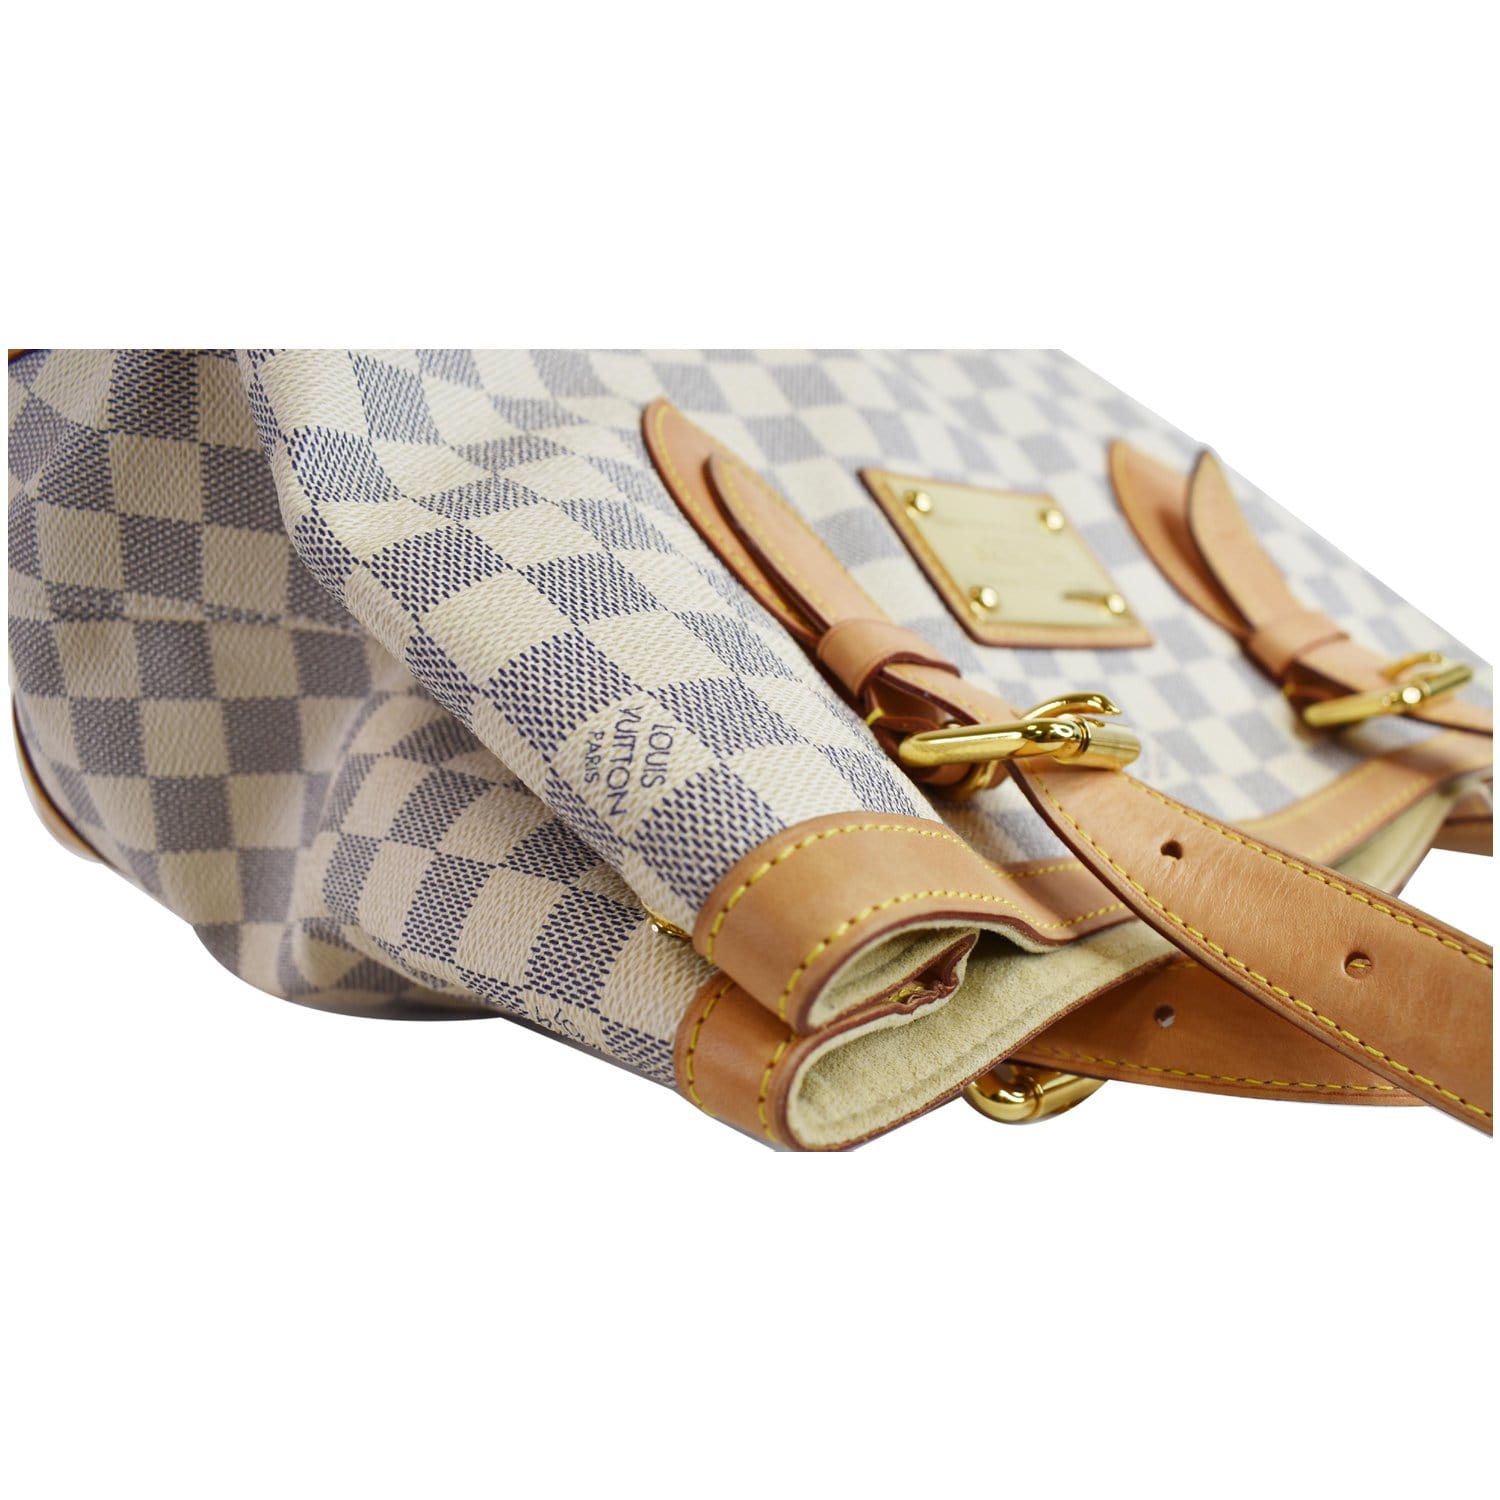 Louis Vuitton 2012 pre-owned Hampstead PM Tote Bag - Farfetch